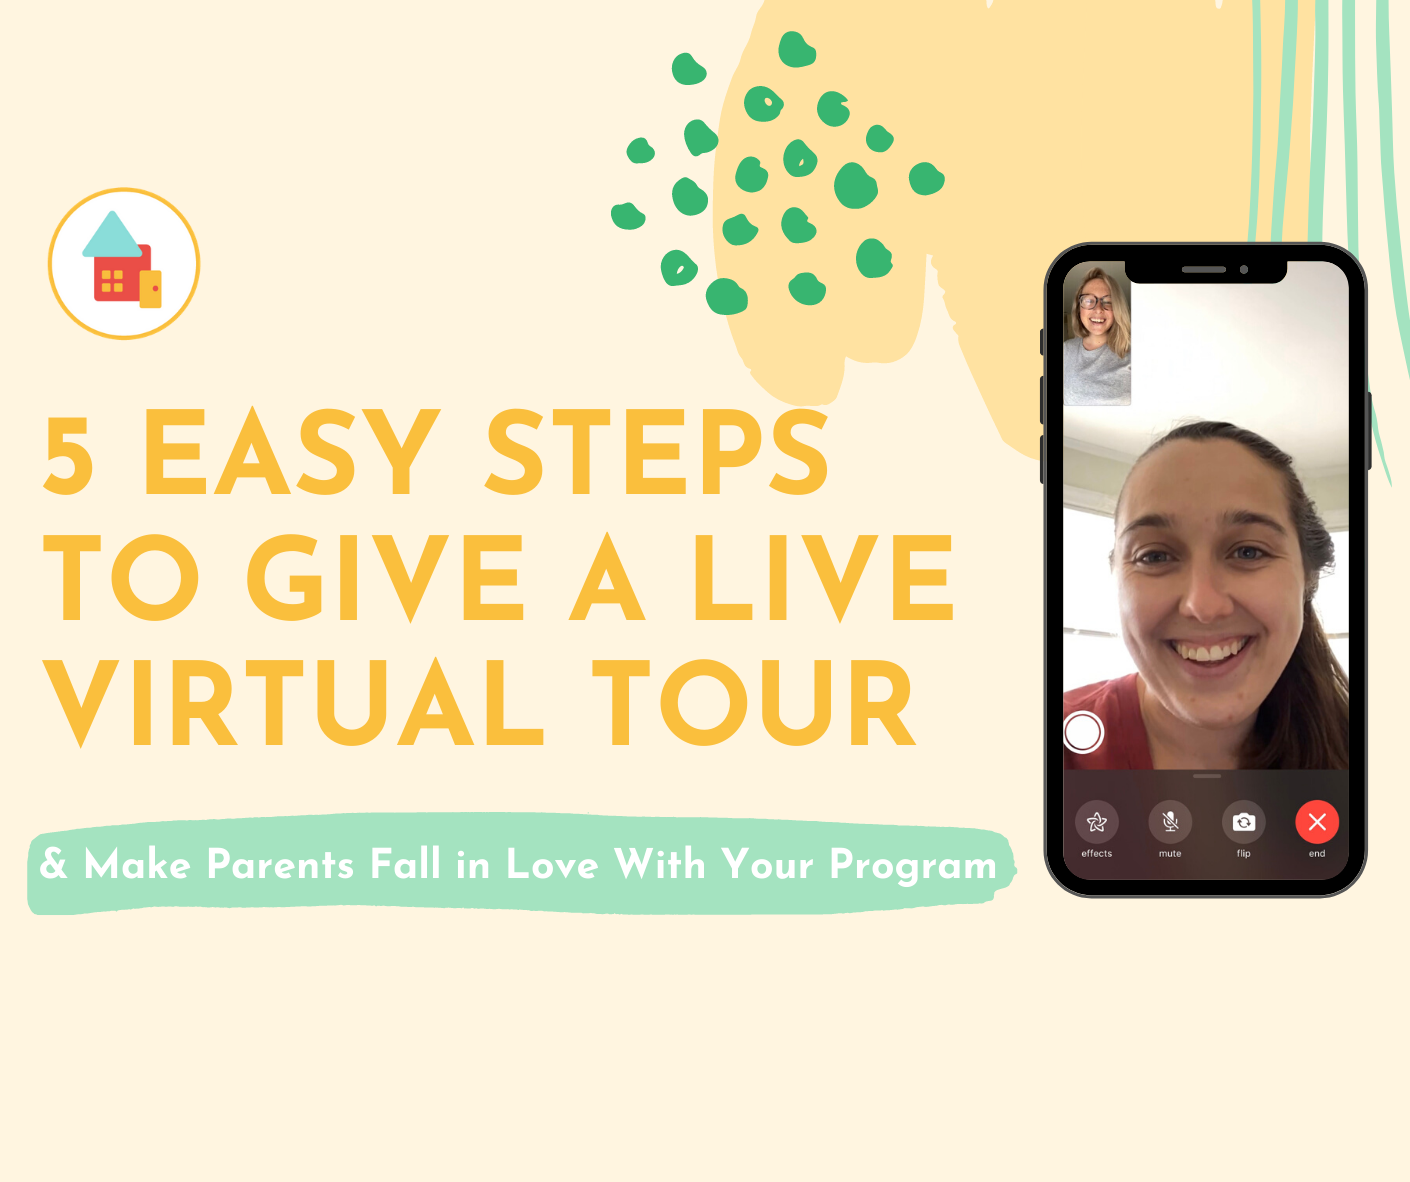 5 Easy Steps to Give a Live Virtual Tour